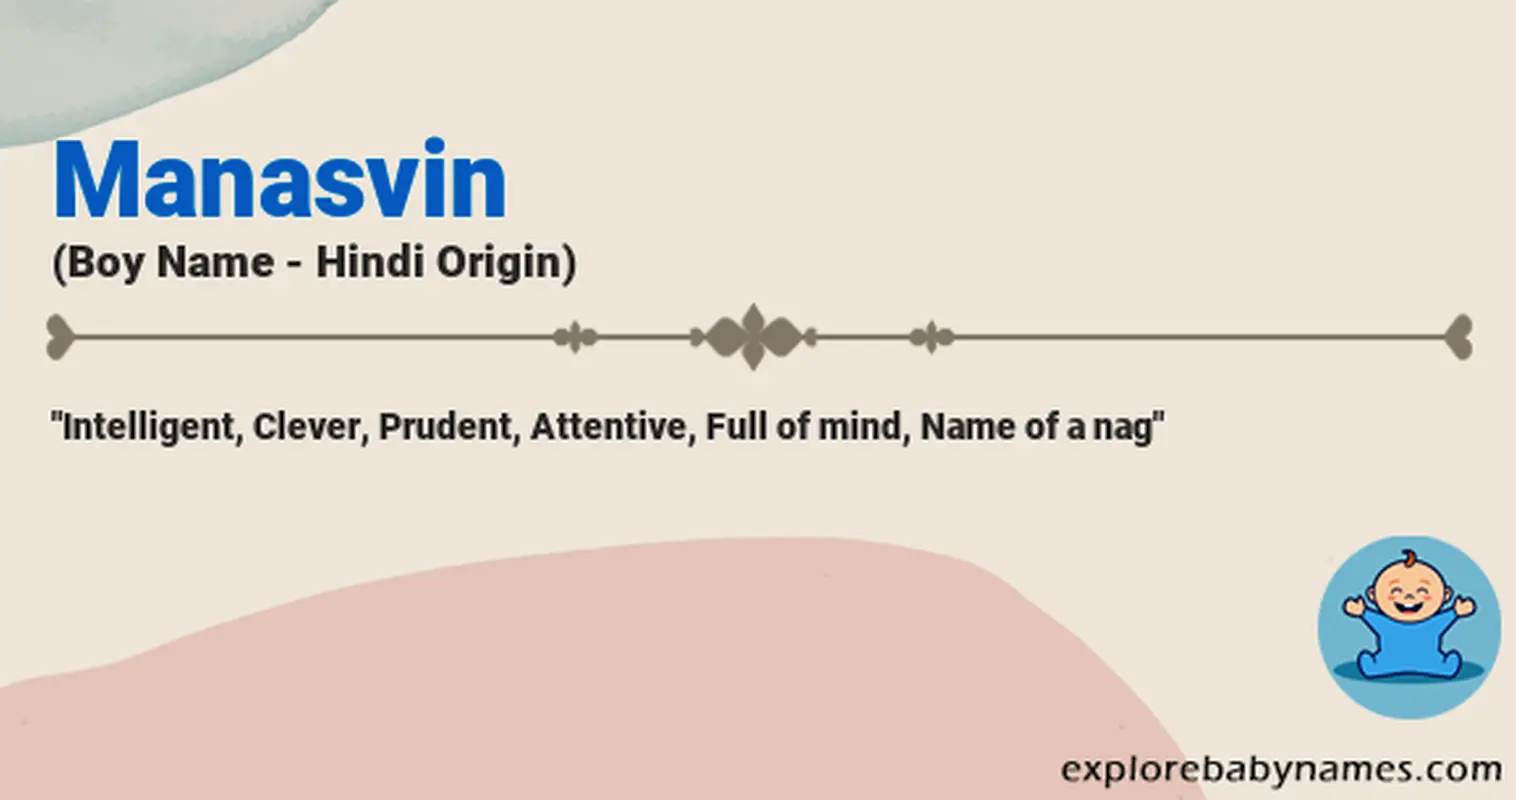 Meaning of Manasvin